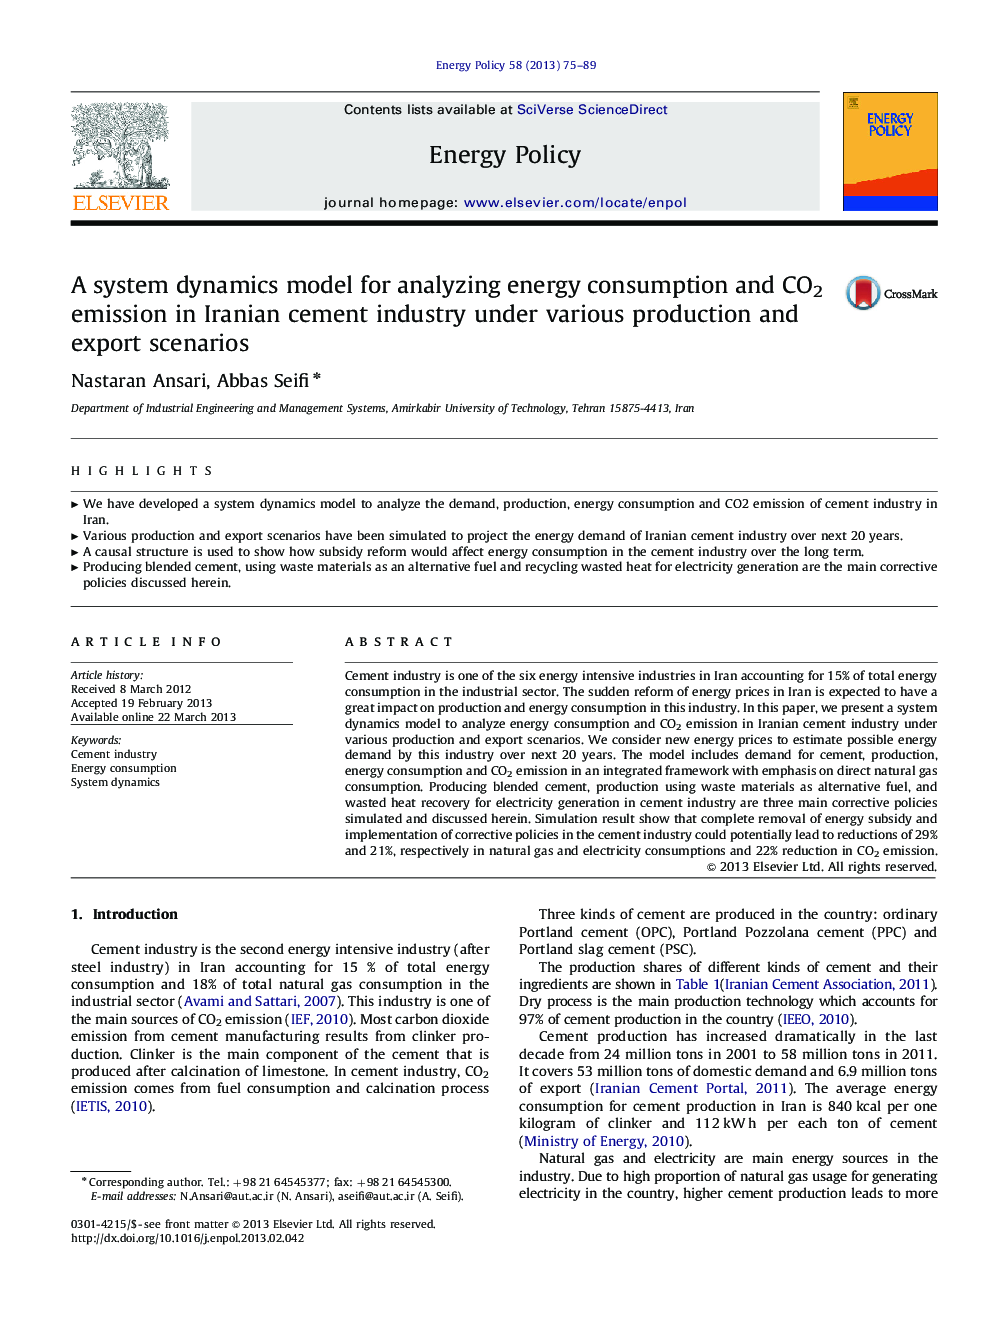 A system dynamics model for analyzing energy consumption and CO2 emission in Iranian cement industry under various production and export scenarios